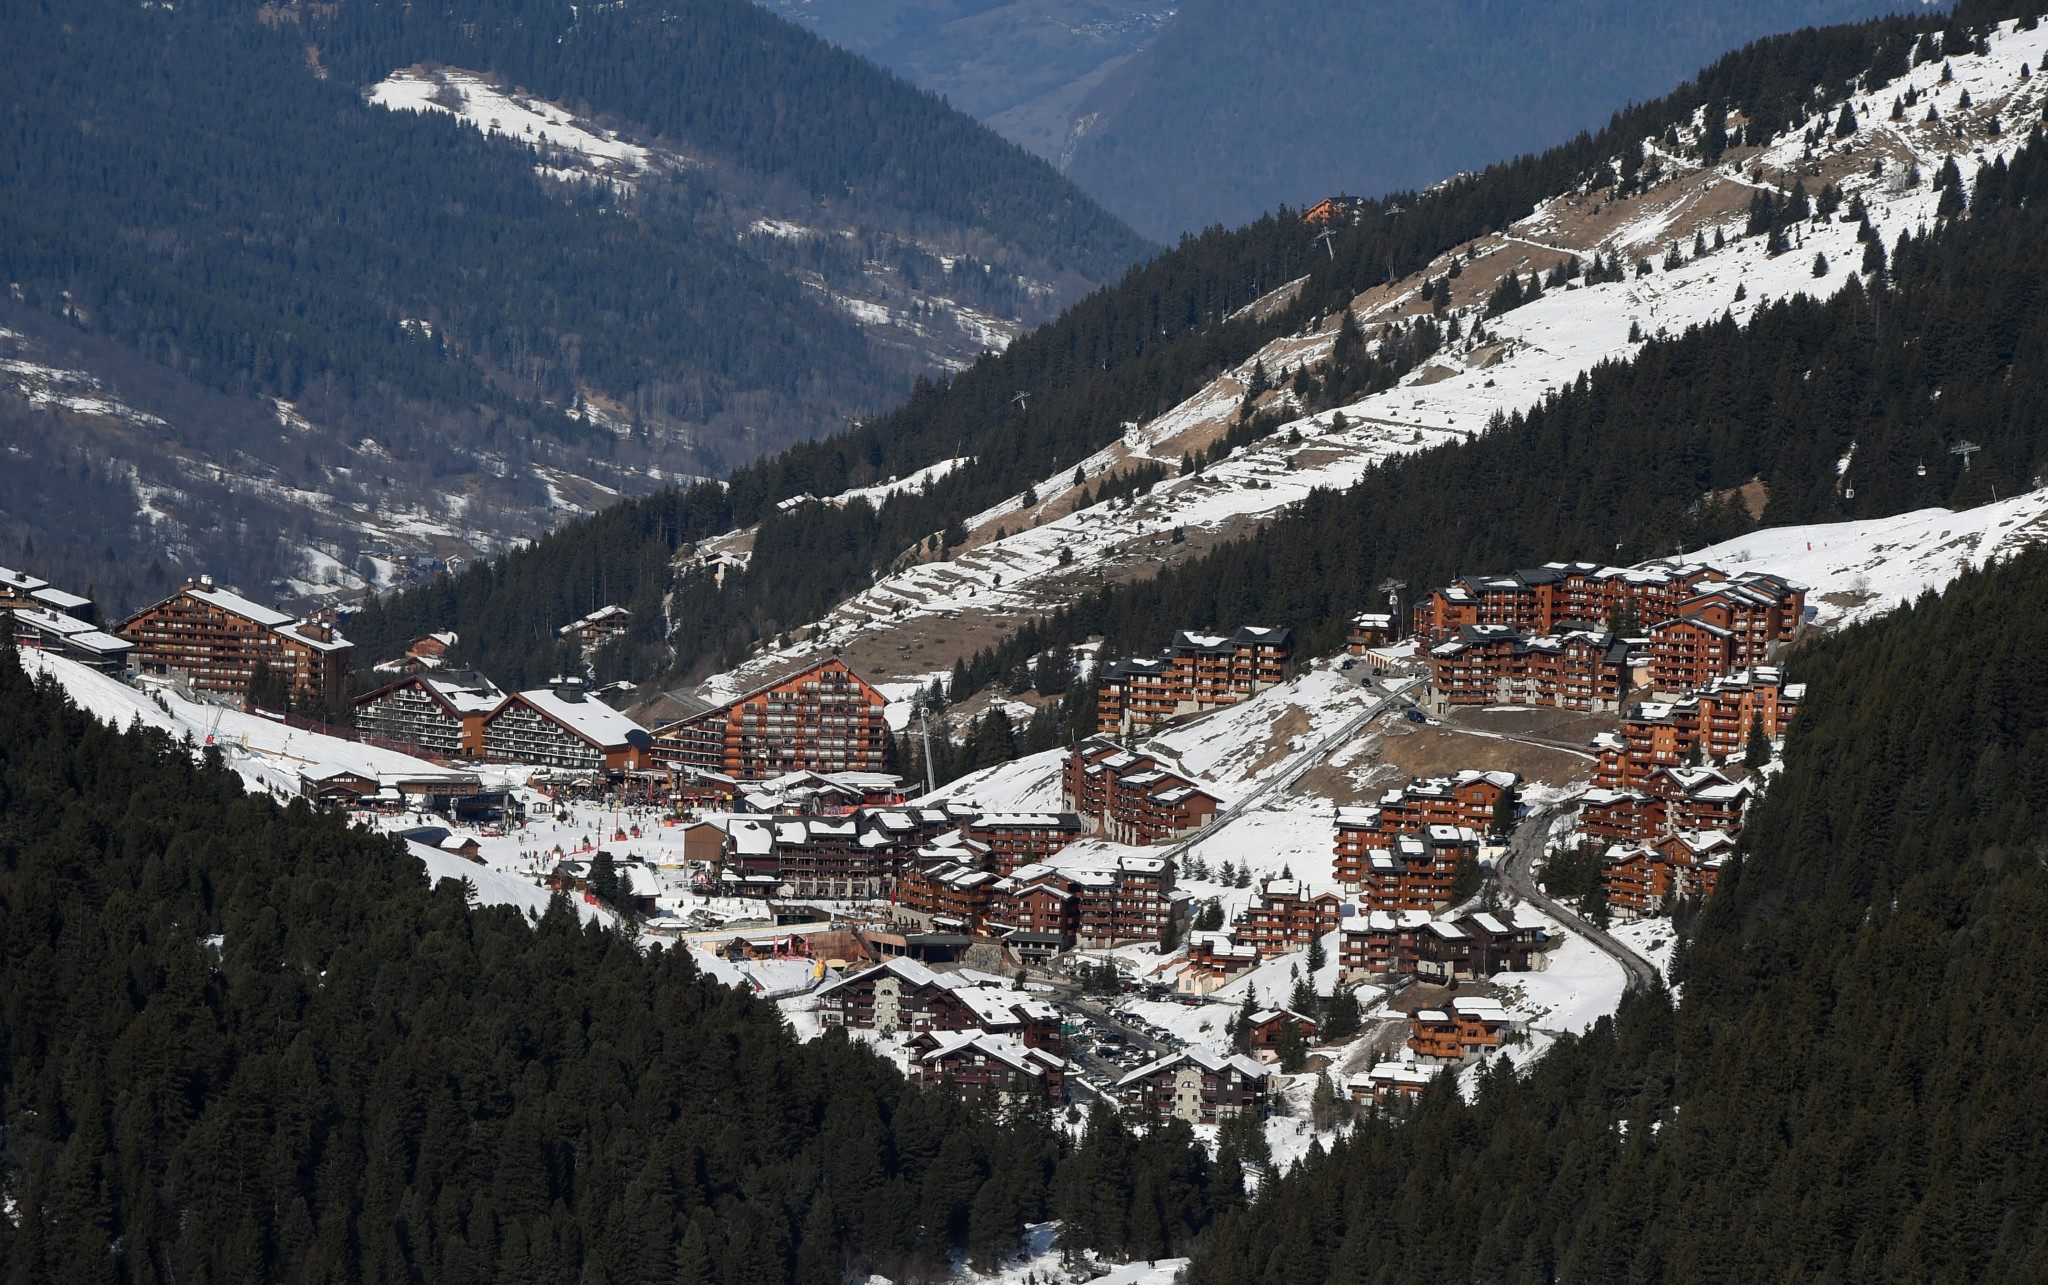 The Courchevel and Méribel resorts will host the World Championships in 2023 ©Getty Images